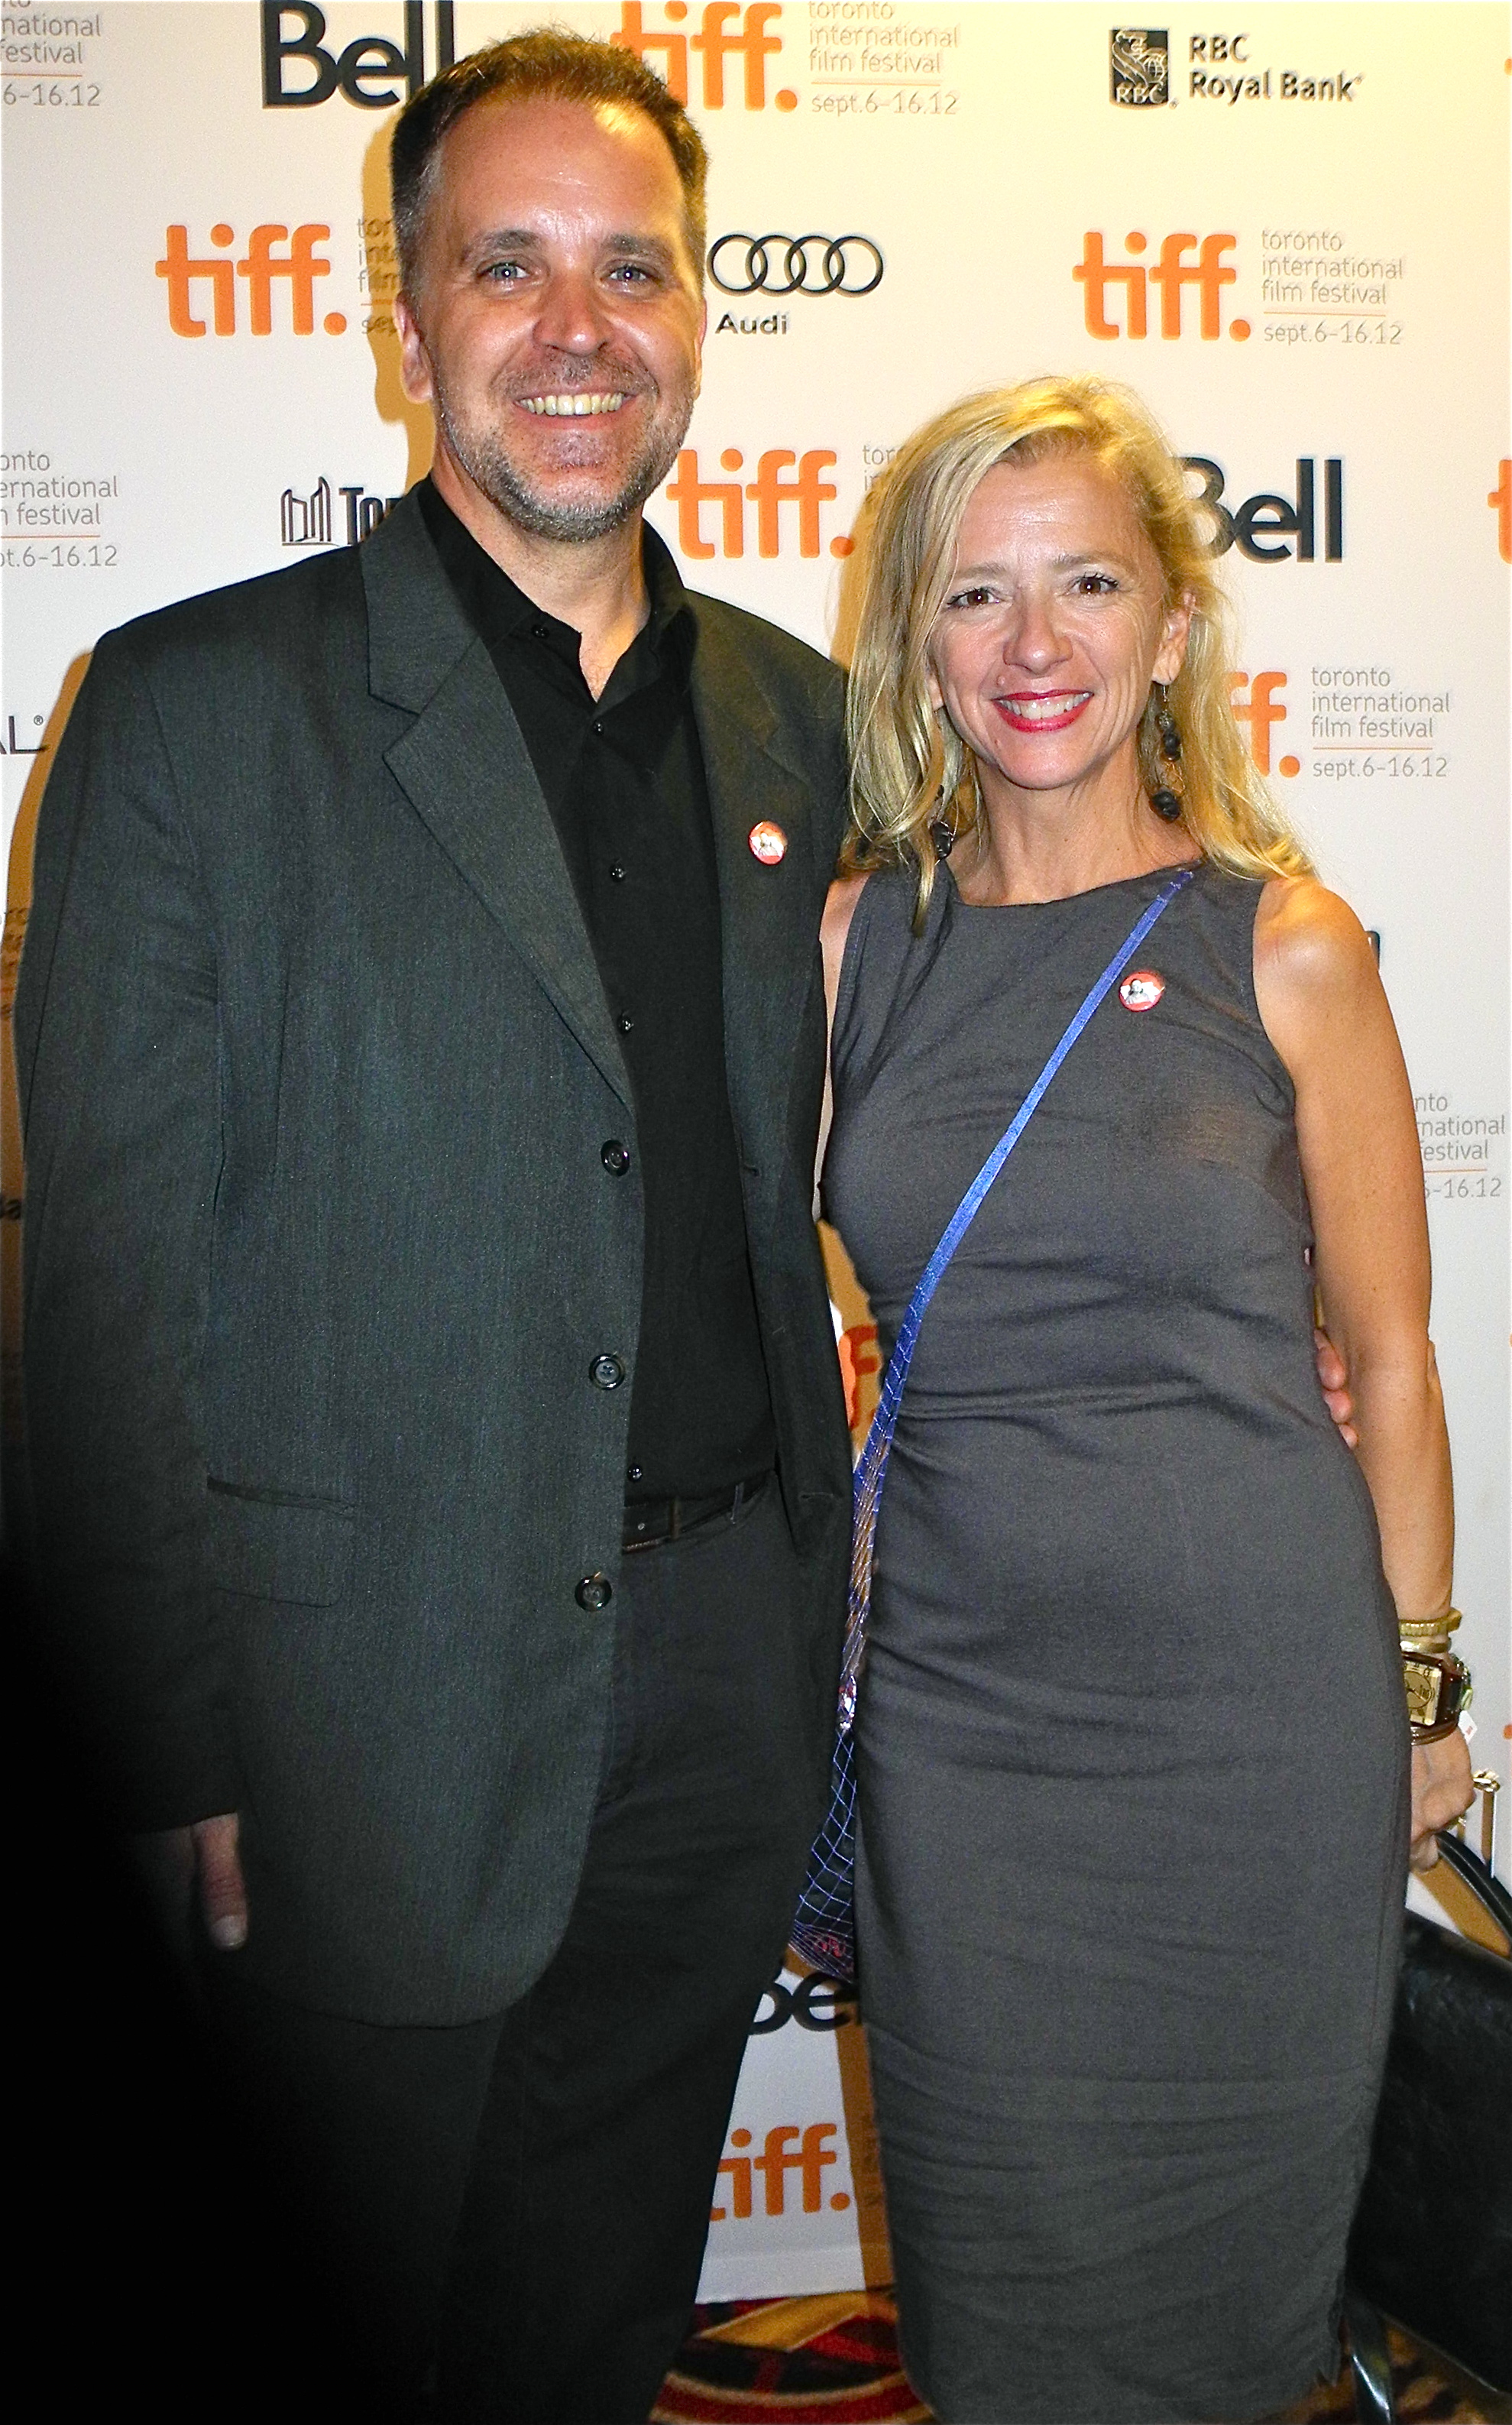 with Michael Oosterom at the Toronto Int'l Film Fest for Janeane From Des Moines